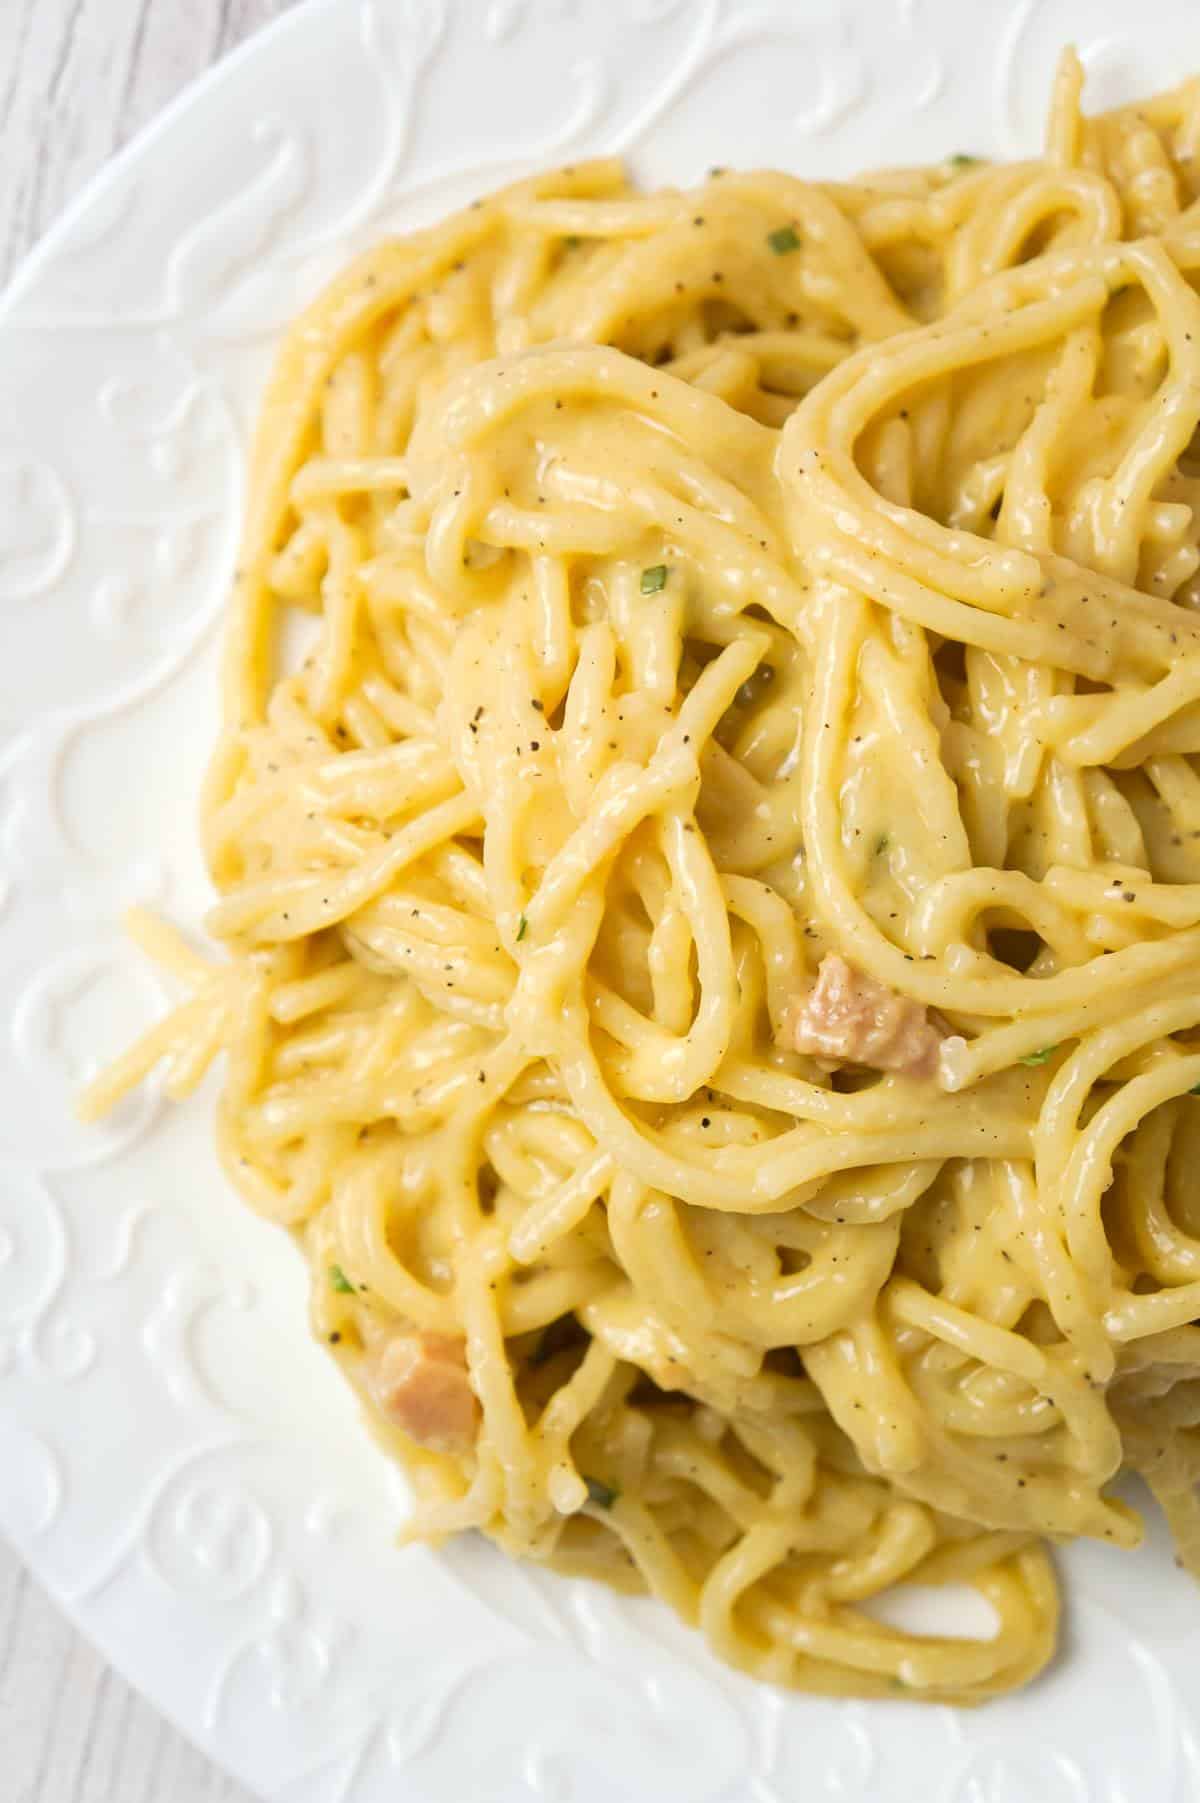 One Pot Chicken Spaghetti is a simple dinner recipe using only spaghetti, thick cream of chicken soup, and seasonings.